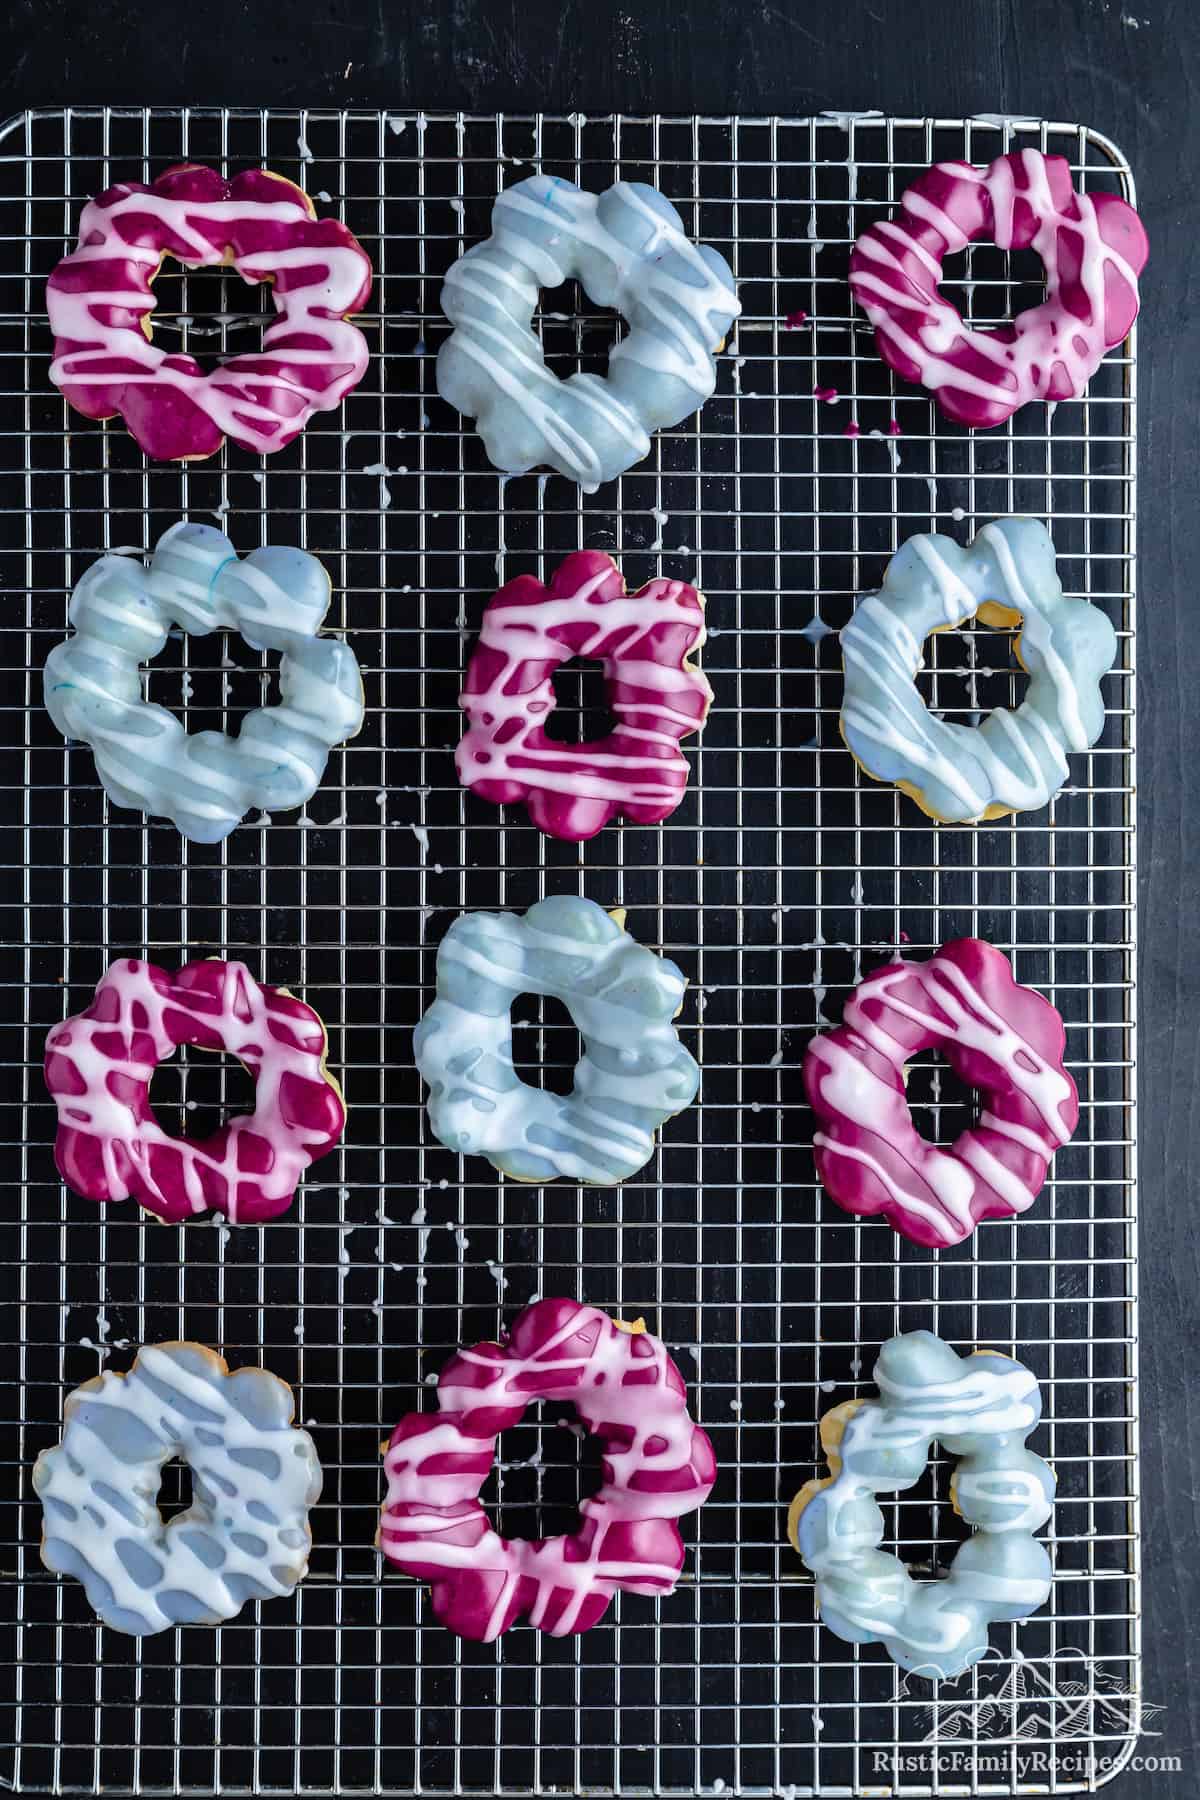 Glazed mochi donuts on a wire cooling rack